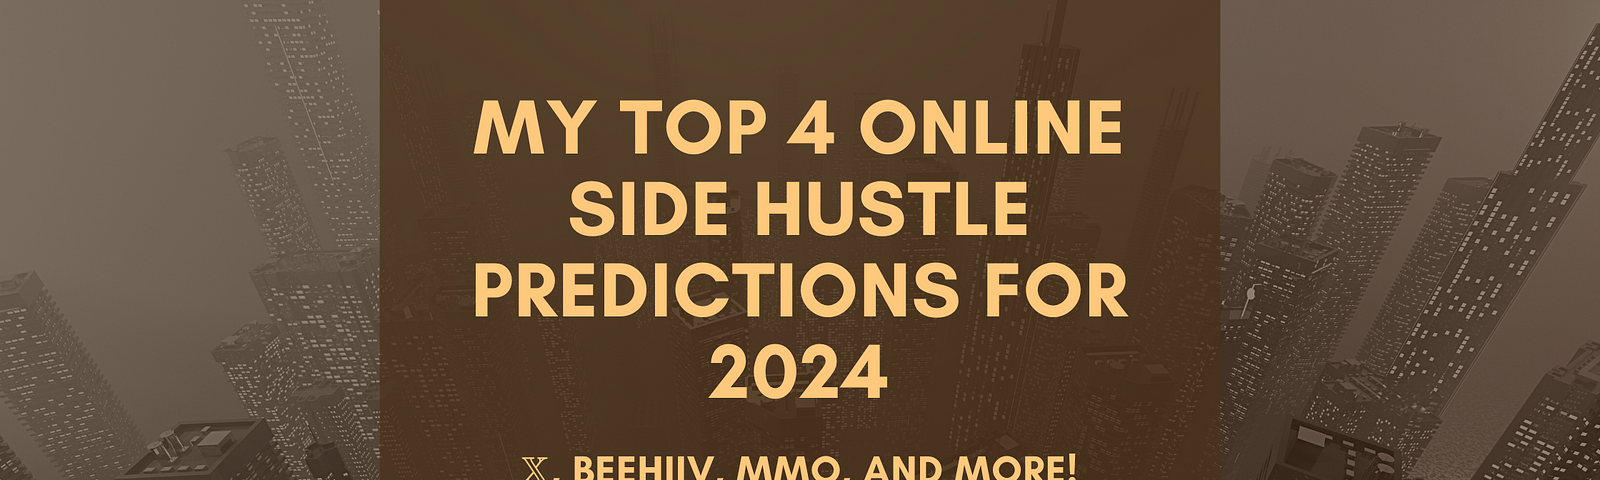 My Top 4 Online Side Hustle Predictions For 2024